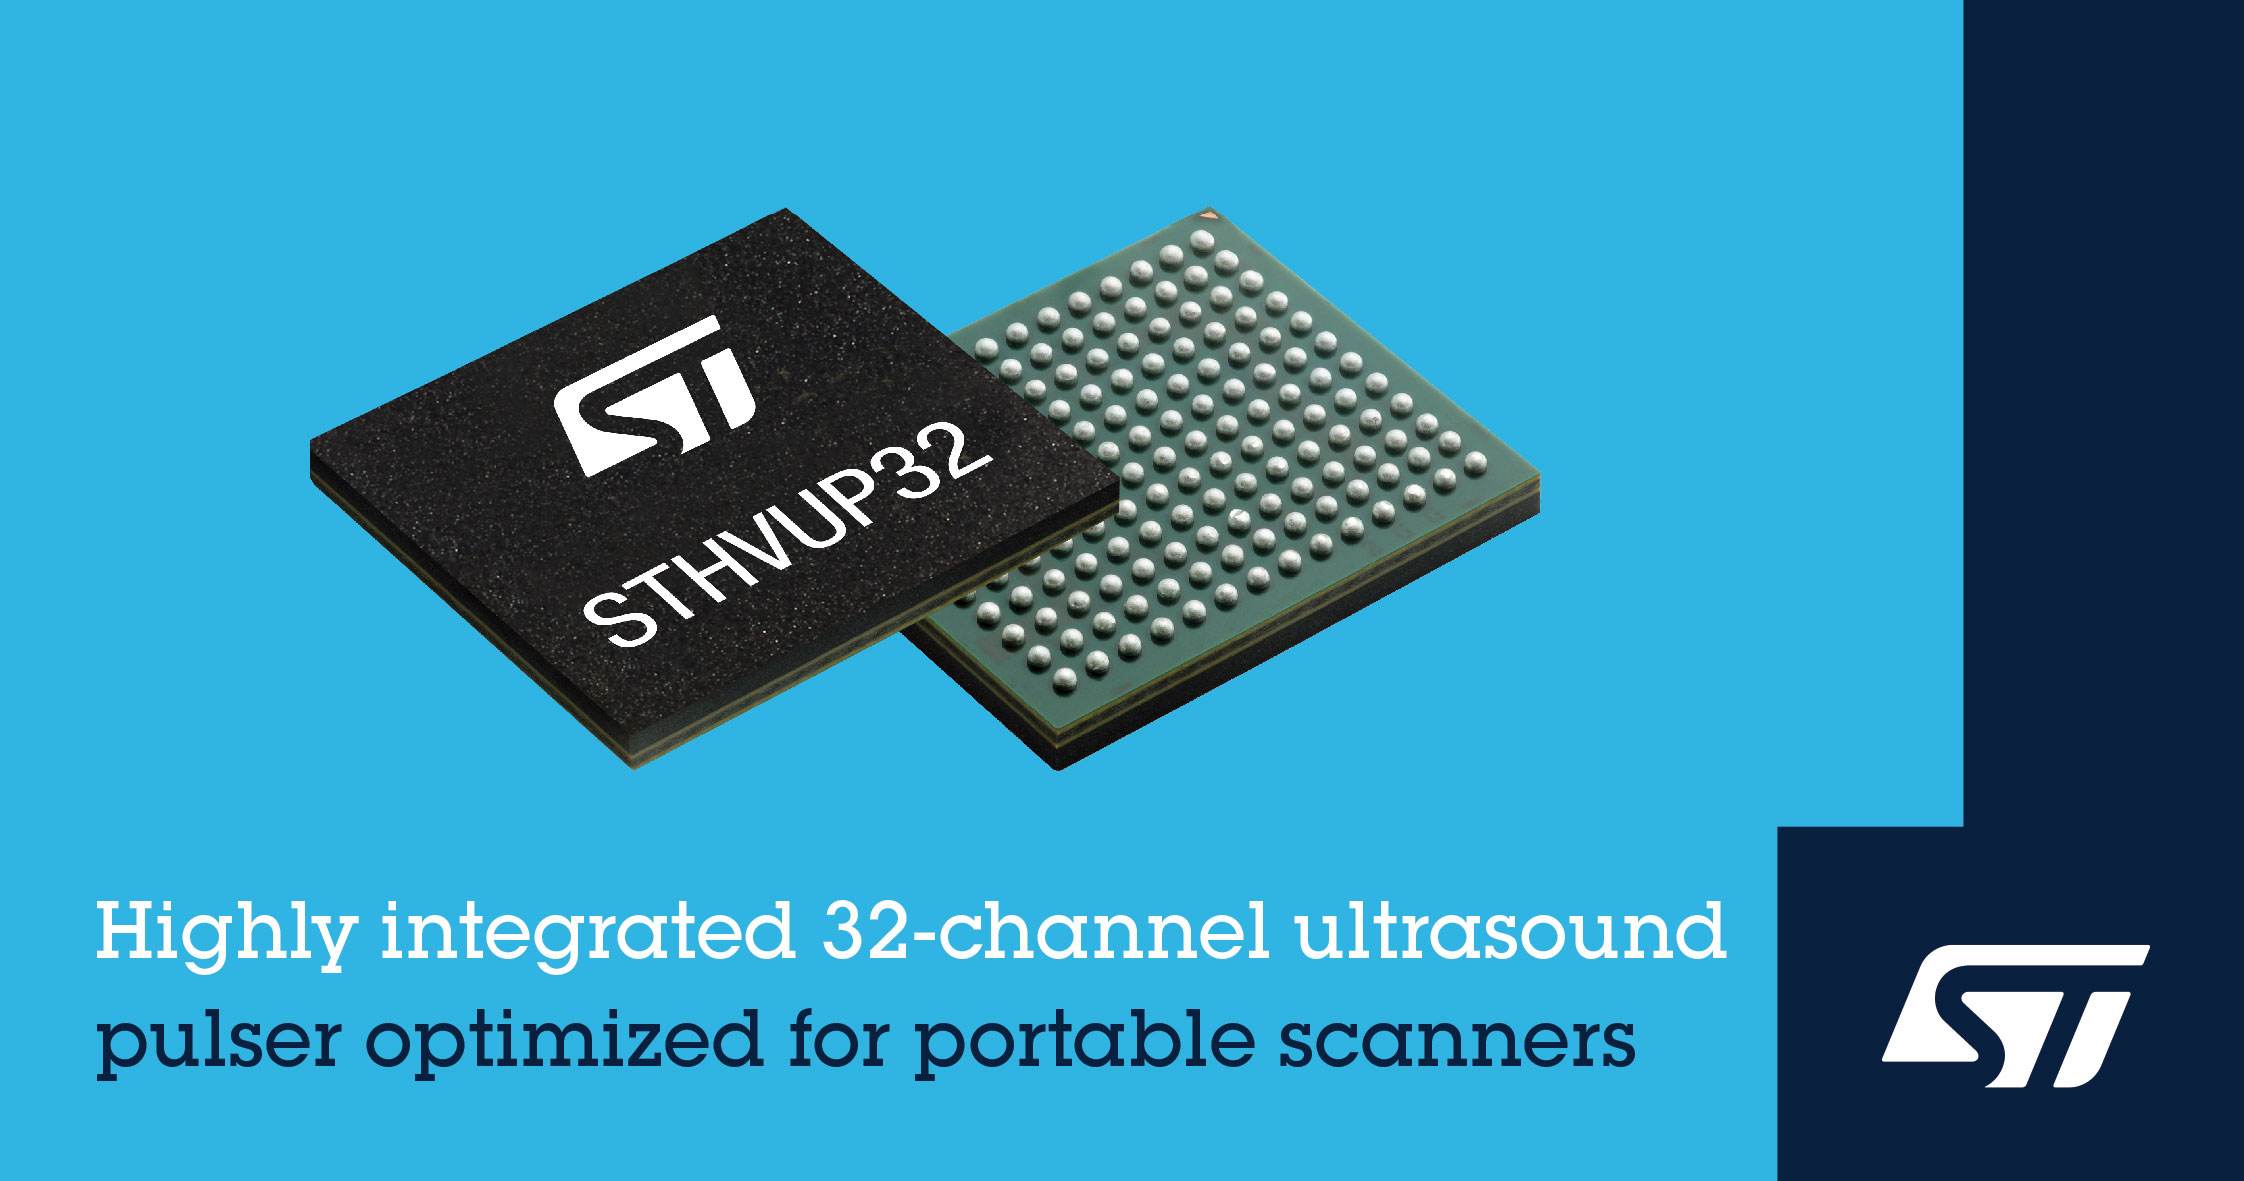 STMicroelectronics Introduces Highly Integrated 32-Channel Ultrasound Transmitter Optimized for Handheld Scanners